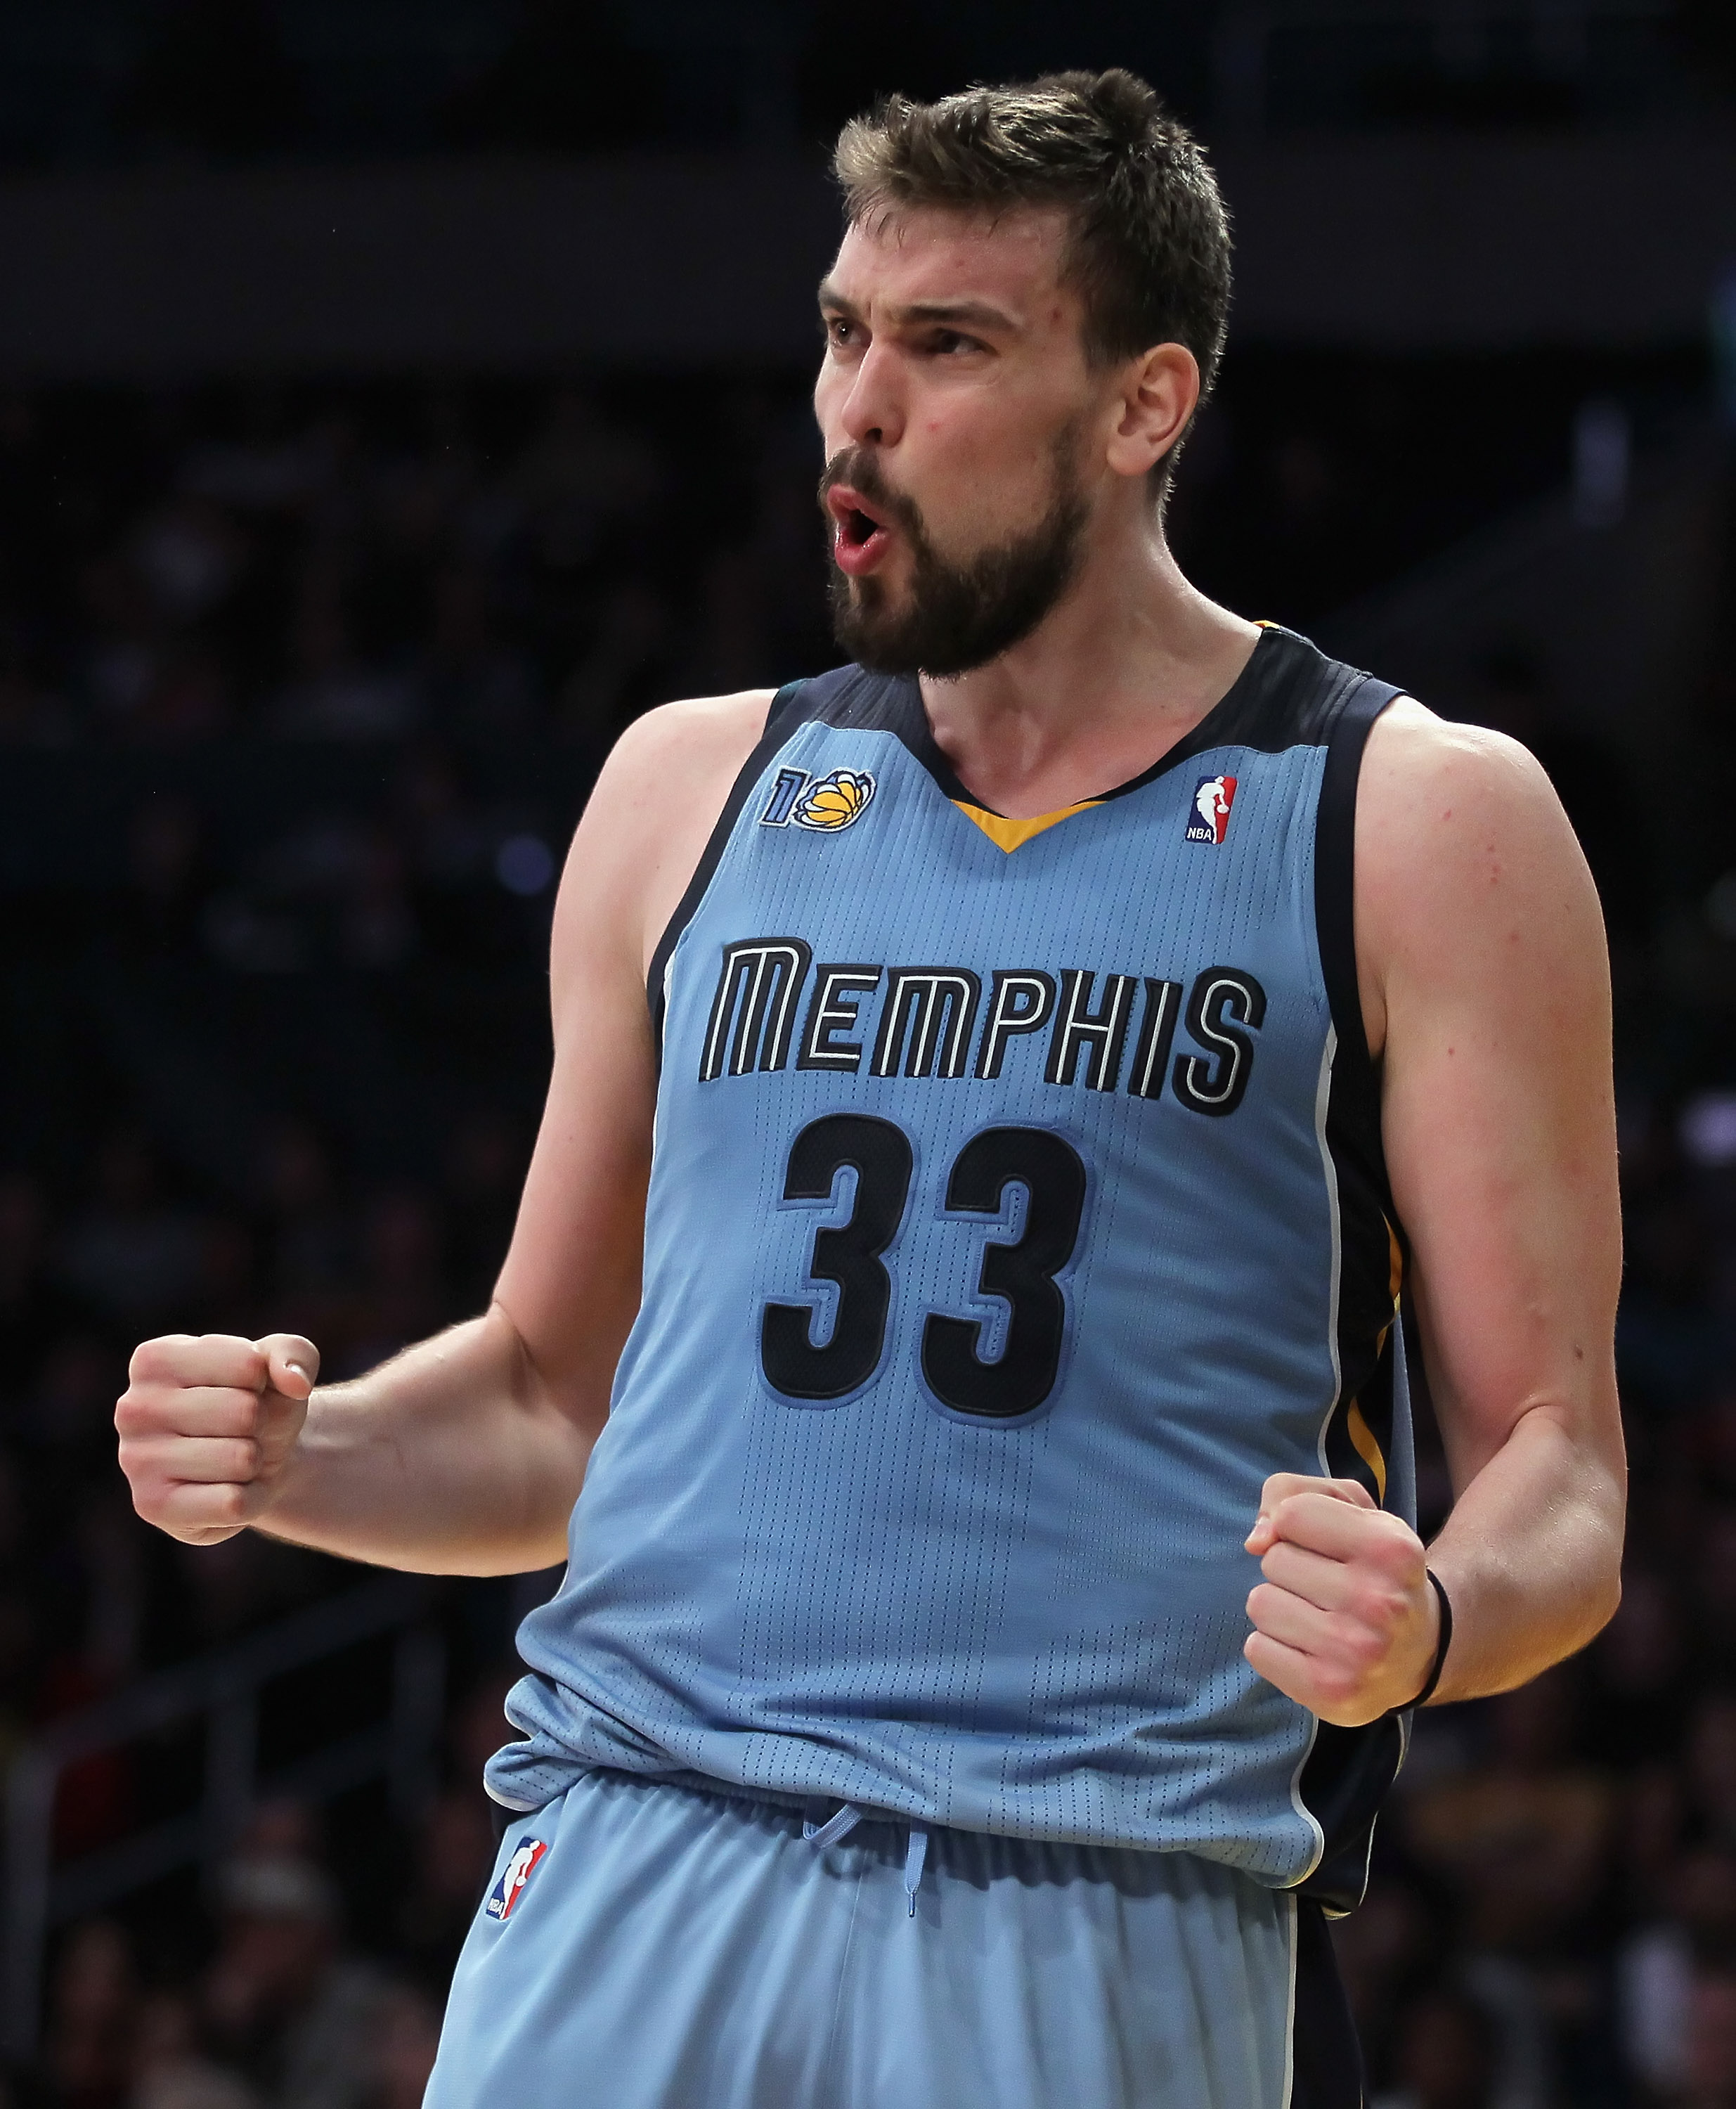 LOS ANGELES, CA - JANUARY 02:  Marc Gasol #33 of the Memphis Grizzlies reacts after committing a foul against the Los Angeles Lakers during the second half at Staples Center on January 2, 2011 in Los Angeles, California. The Grizzlies defeated the Lakers